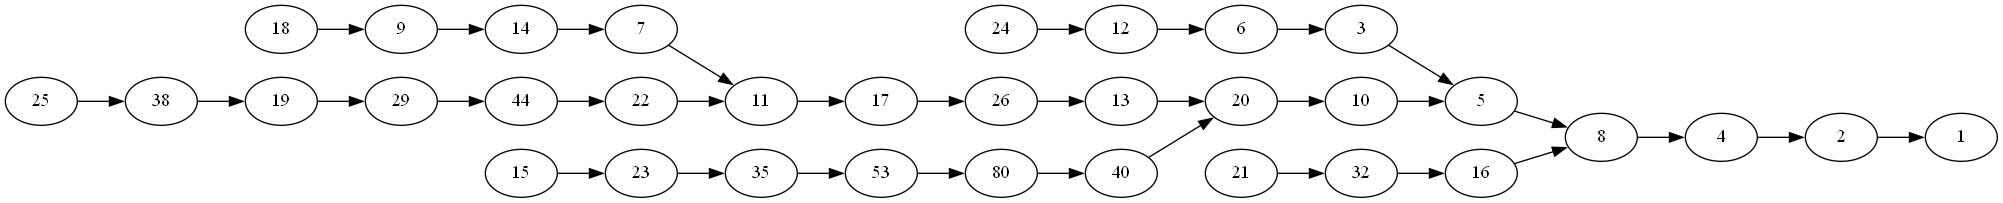 Graph of the first 26 compressed Collatz sequences